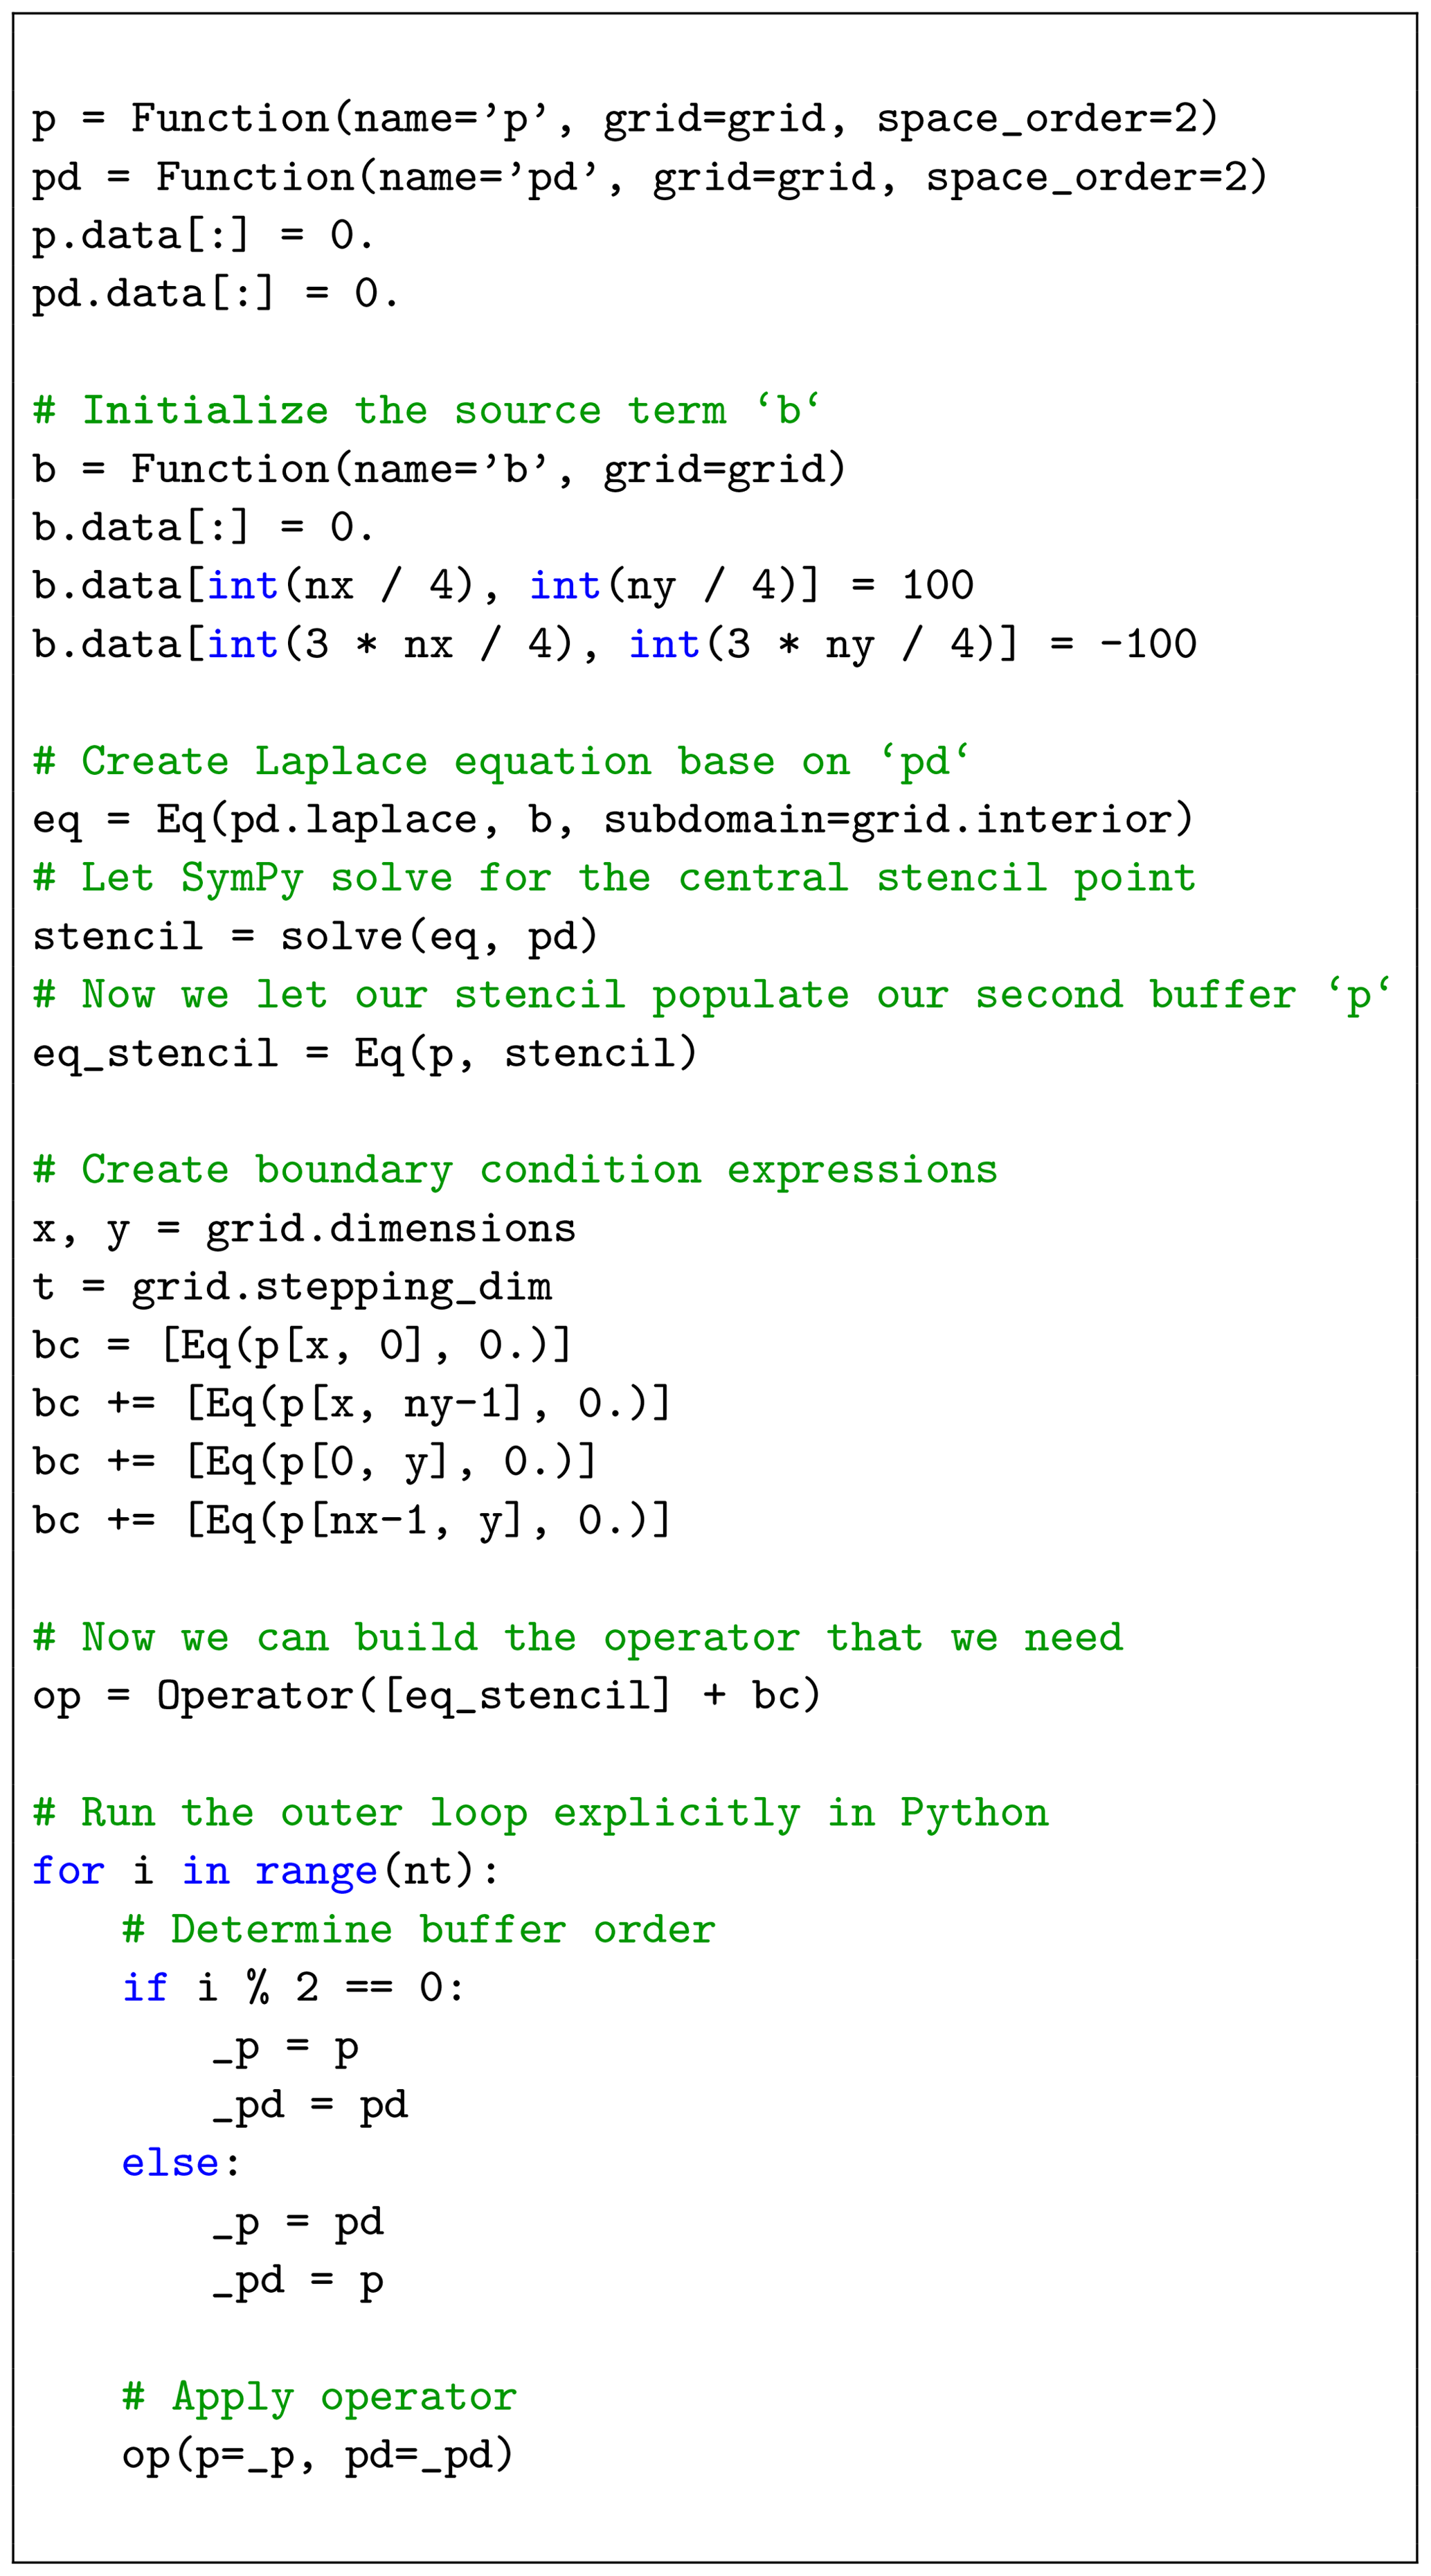 What Is Primary Expression In Dev C++